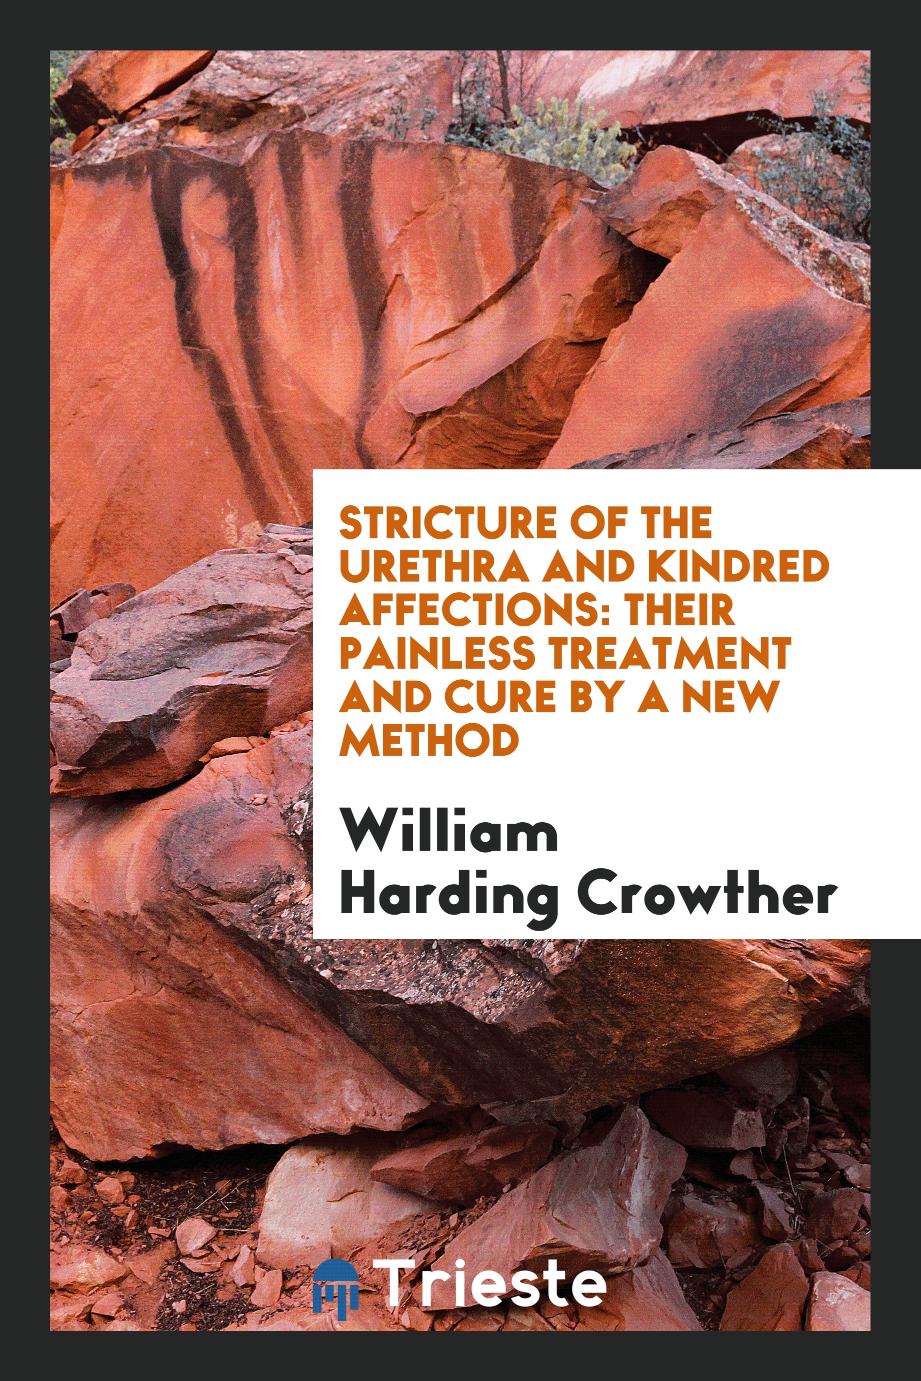 Stricture of the Urethra and Kindred Affections: Their Painless Treatment and Cure by a New Method